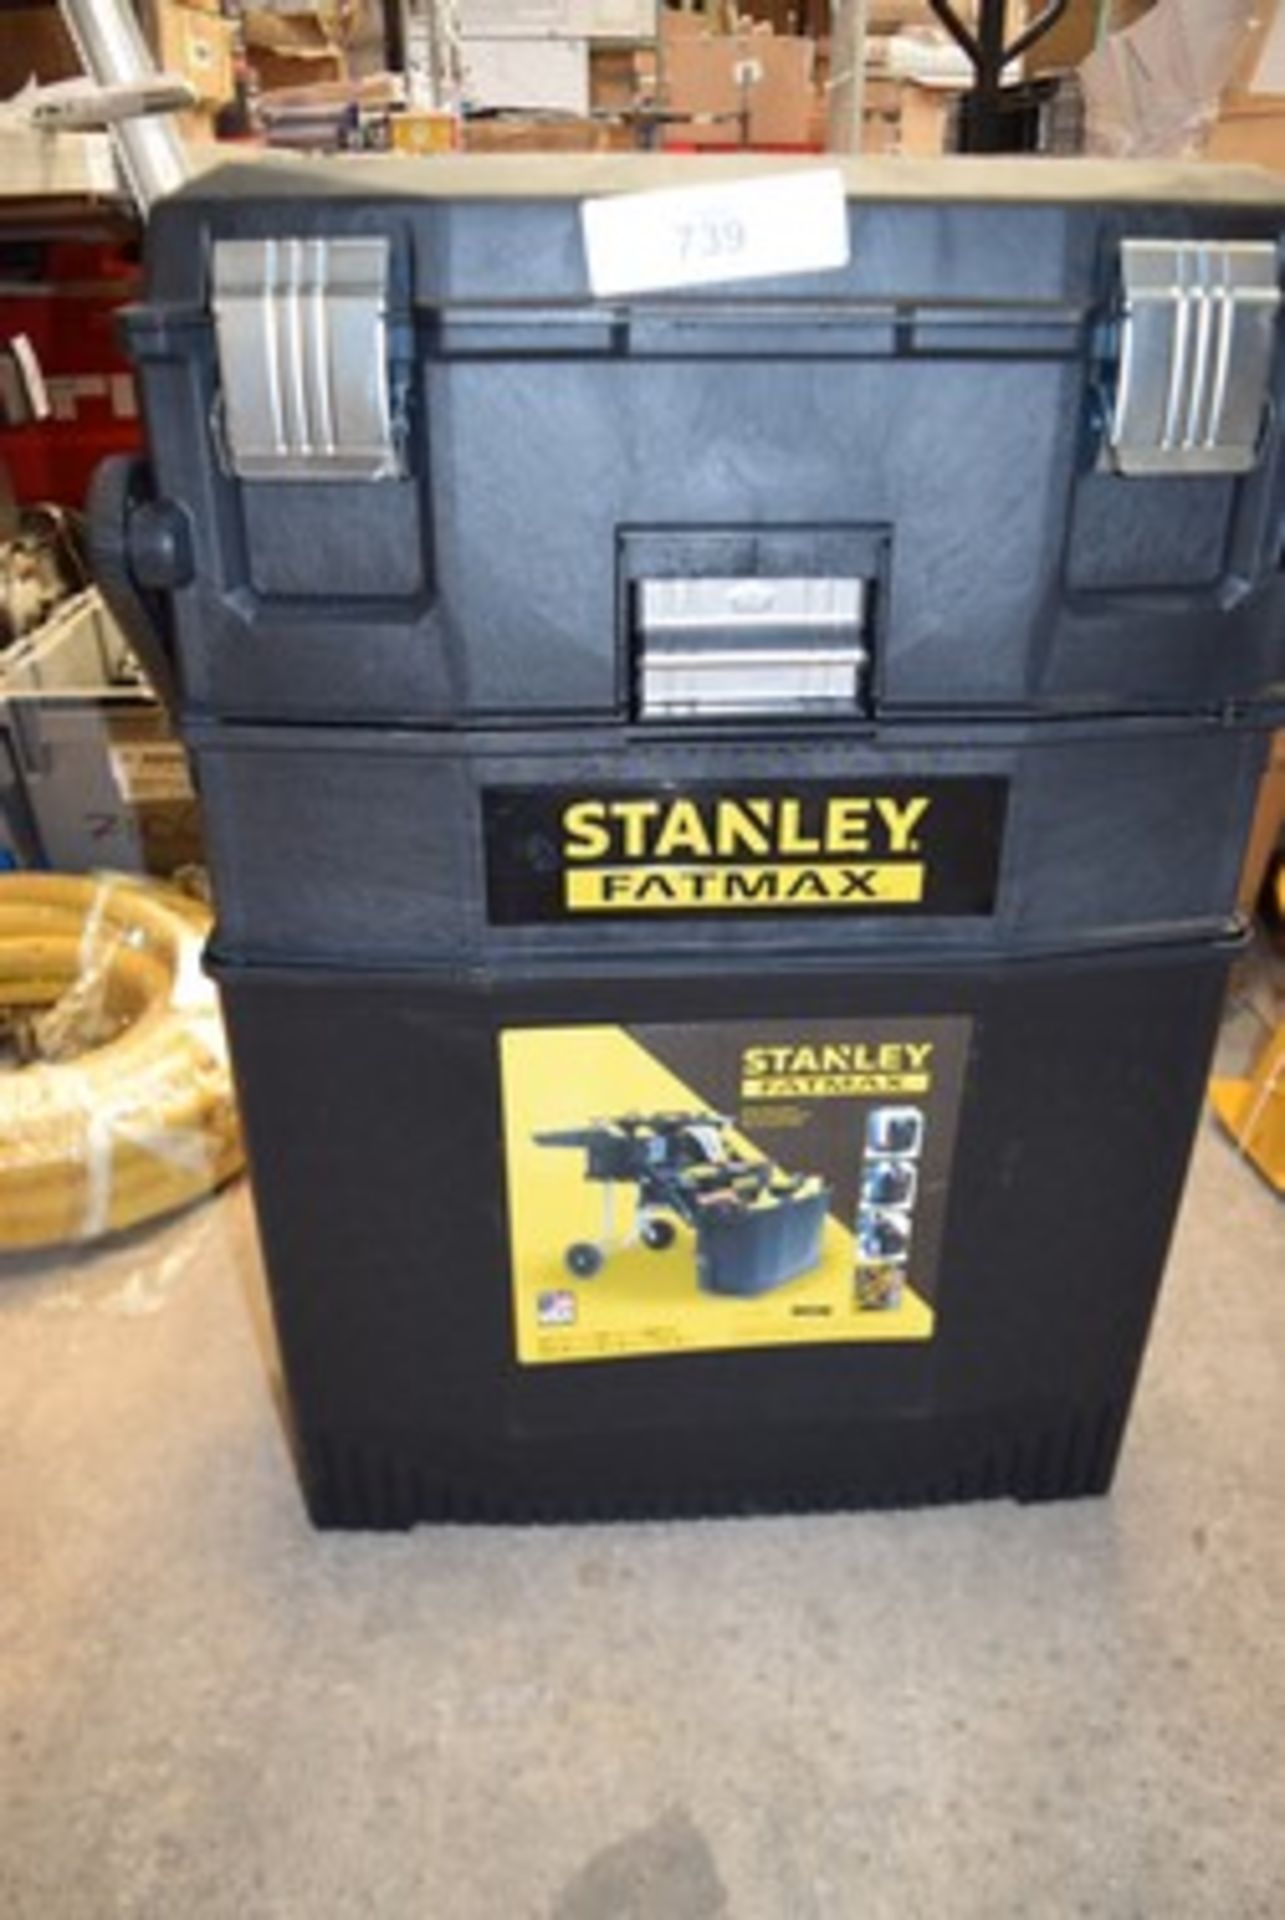 1 x Stanley Fatmax mobile workstation, code 1.94-210, size 54.9 x 41.3 x 73.3cm, some marks due to